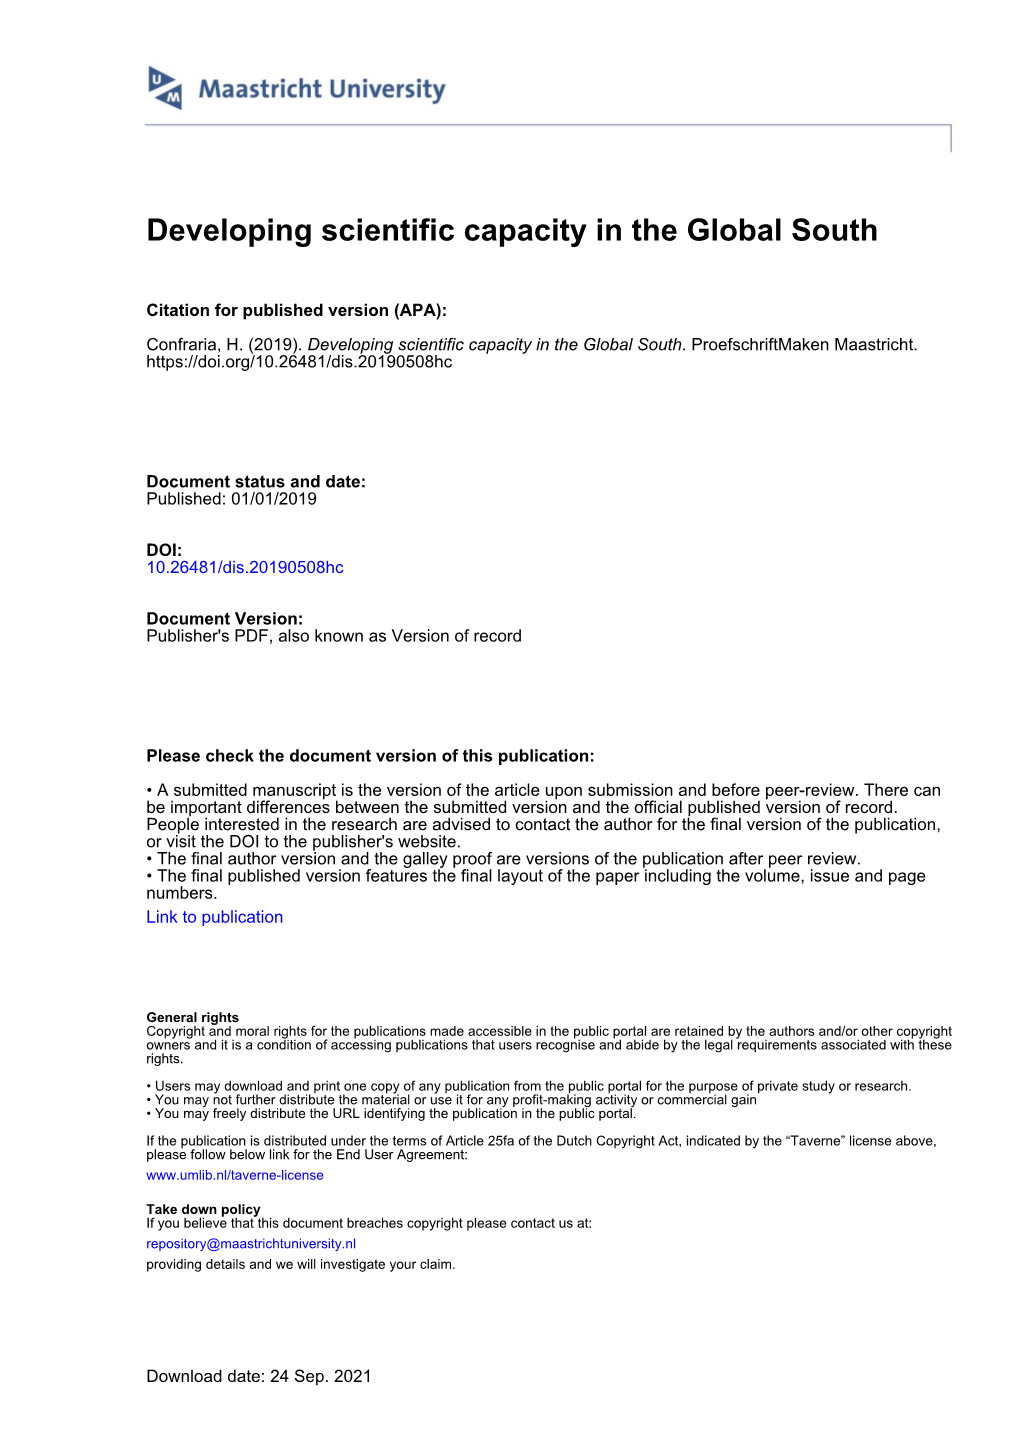 Developing Scientific Capacity in the Global South